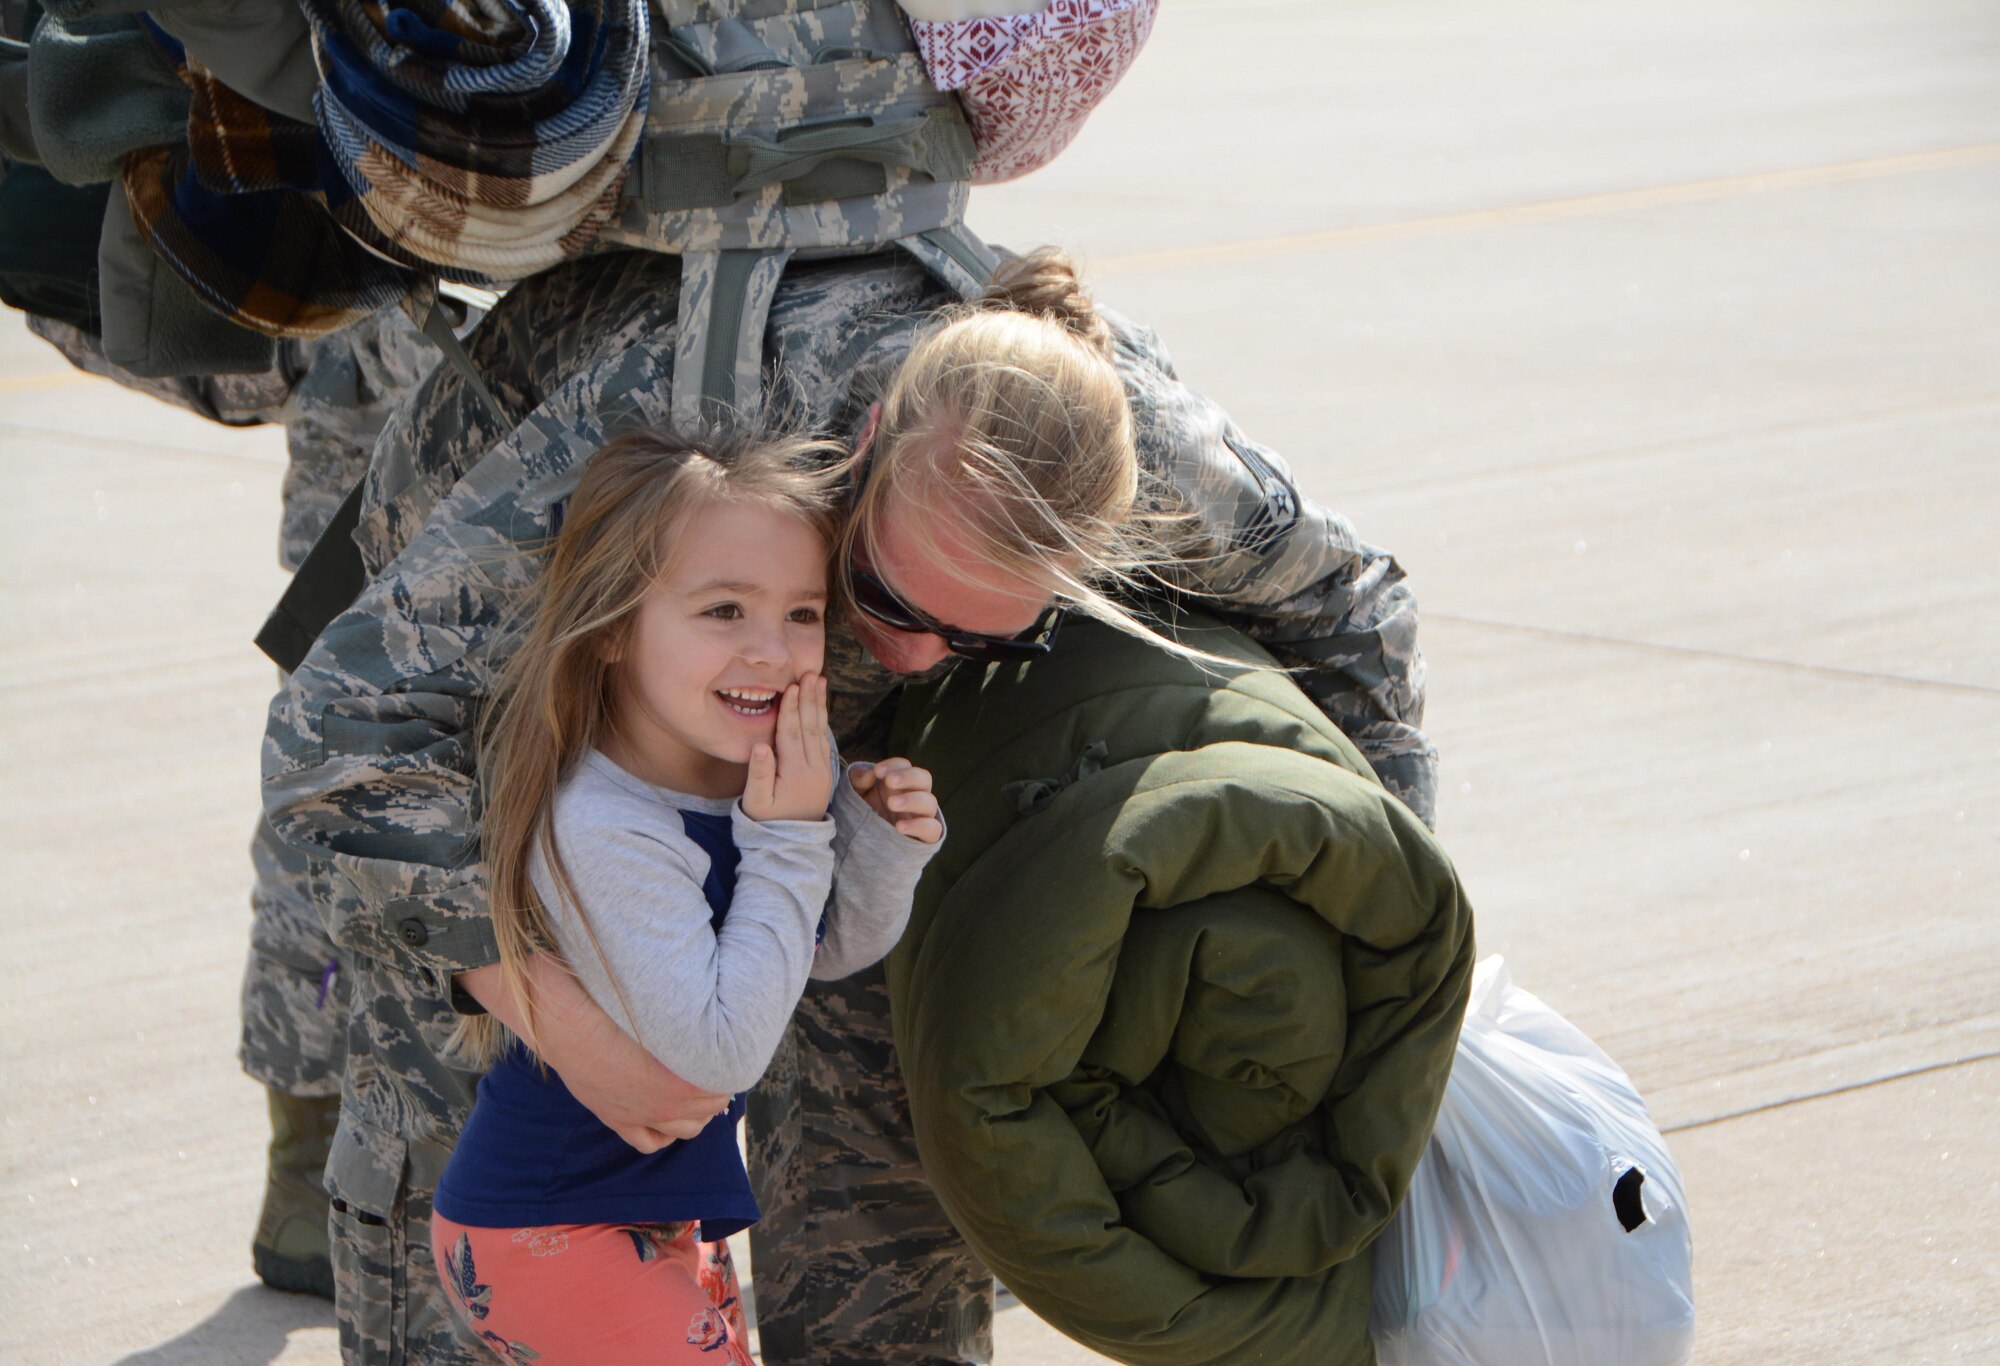 Staff Sgt. Morgan Marriott of the 507th Maintenance Squadron hugs her daughter following a deployment Feb. 19, 2017, at Tinker Air Force Base, Okla. More than 90 Reservists deployed in December 2016 in support of air operations at Incirlik Air Base, Turkey, against the Islamic State group. (U.S. Air Force photo/Tech. Sgt. Lauren Gleason)